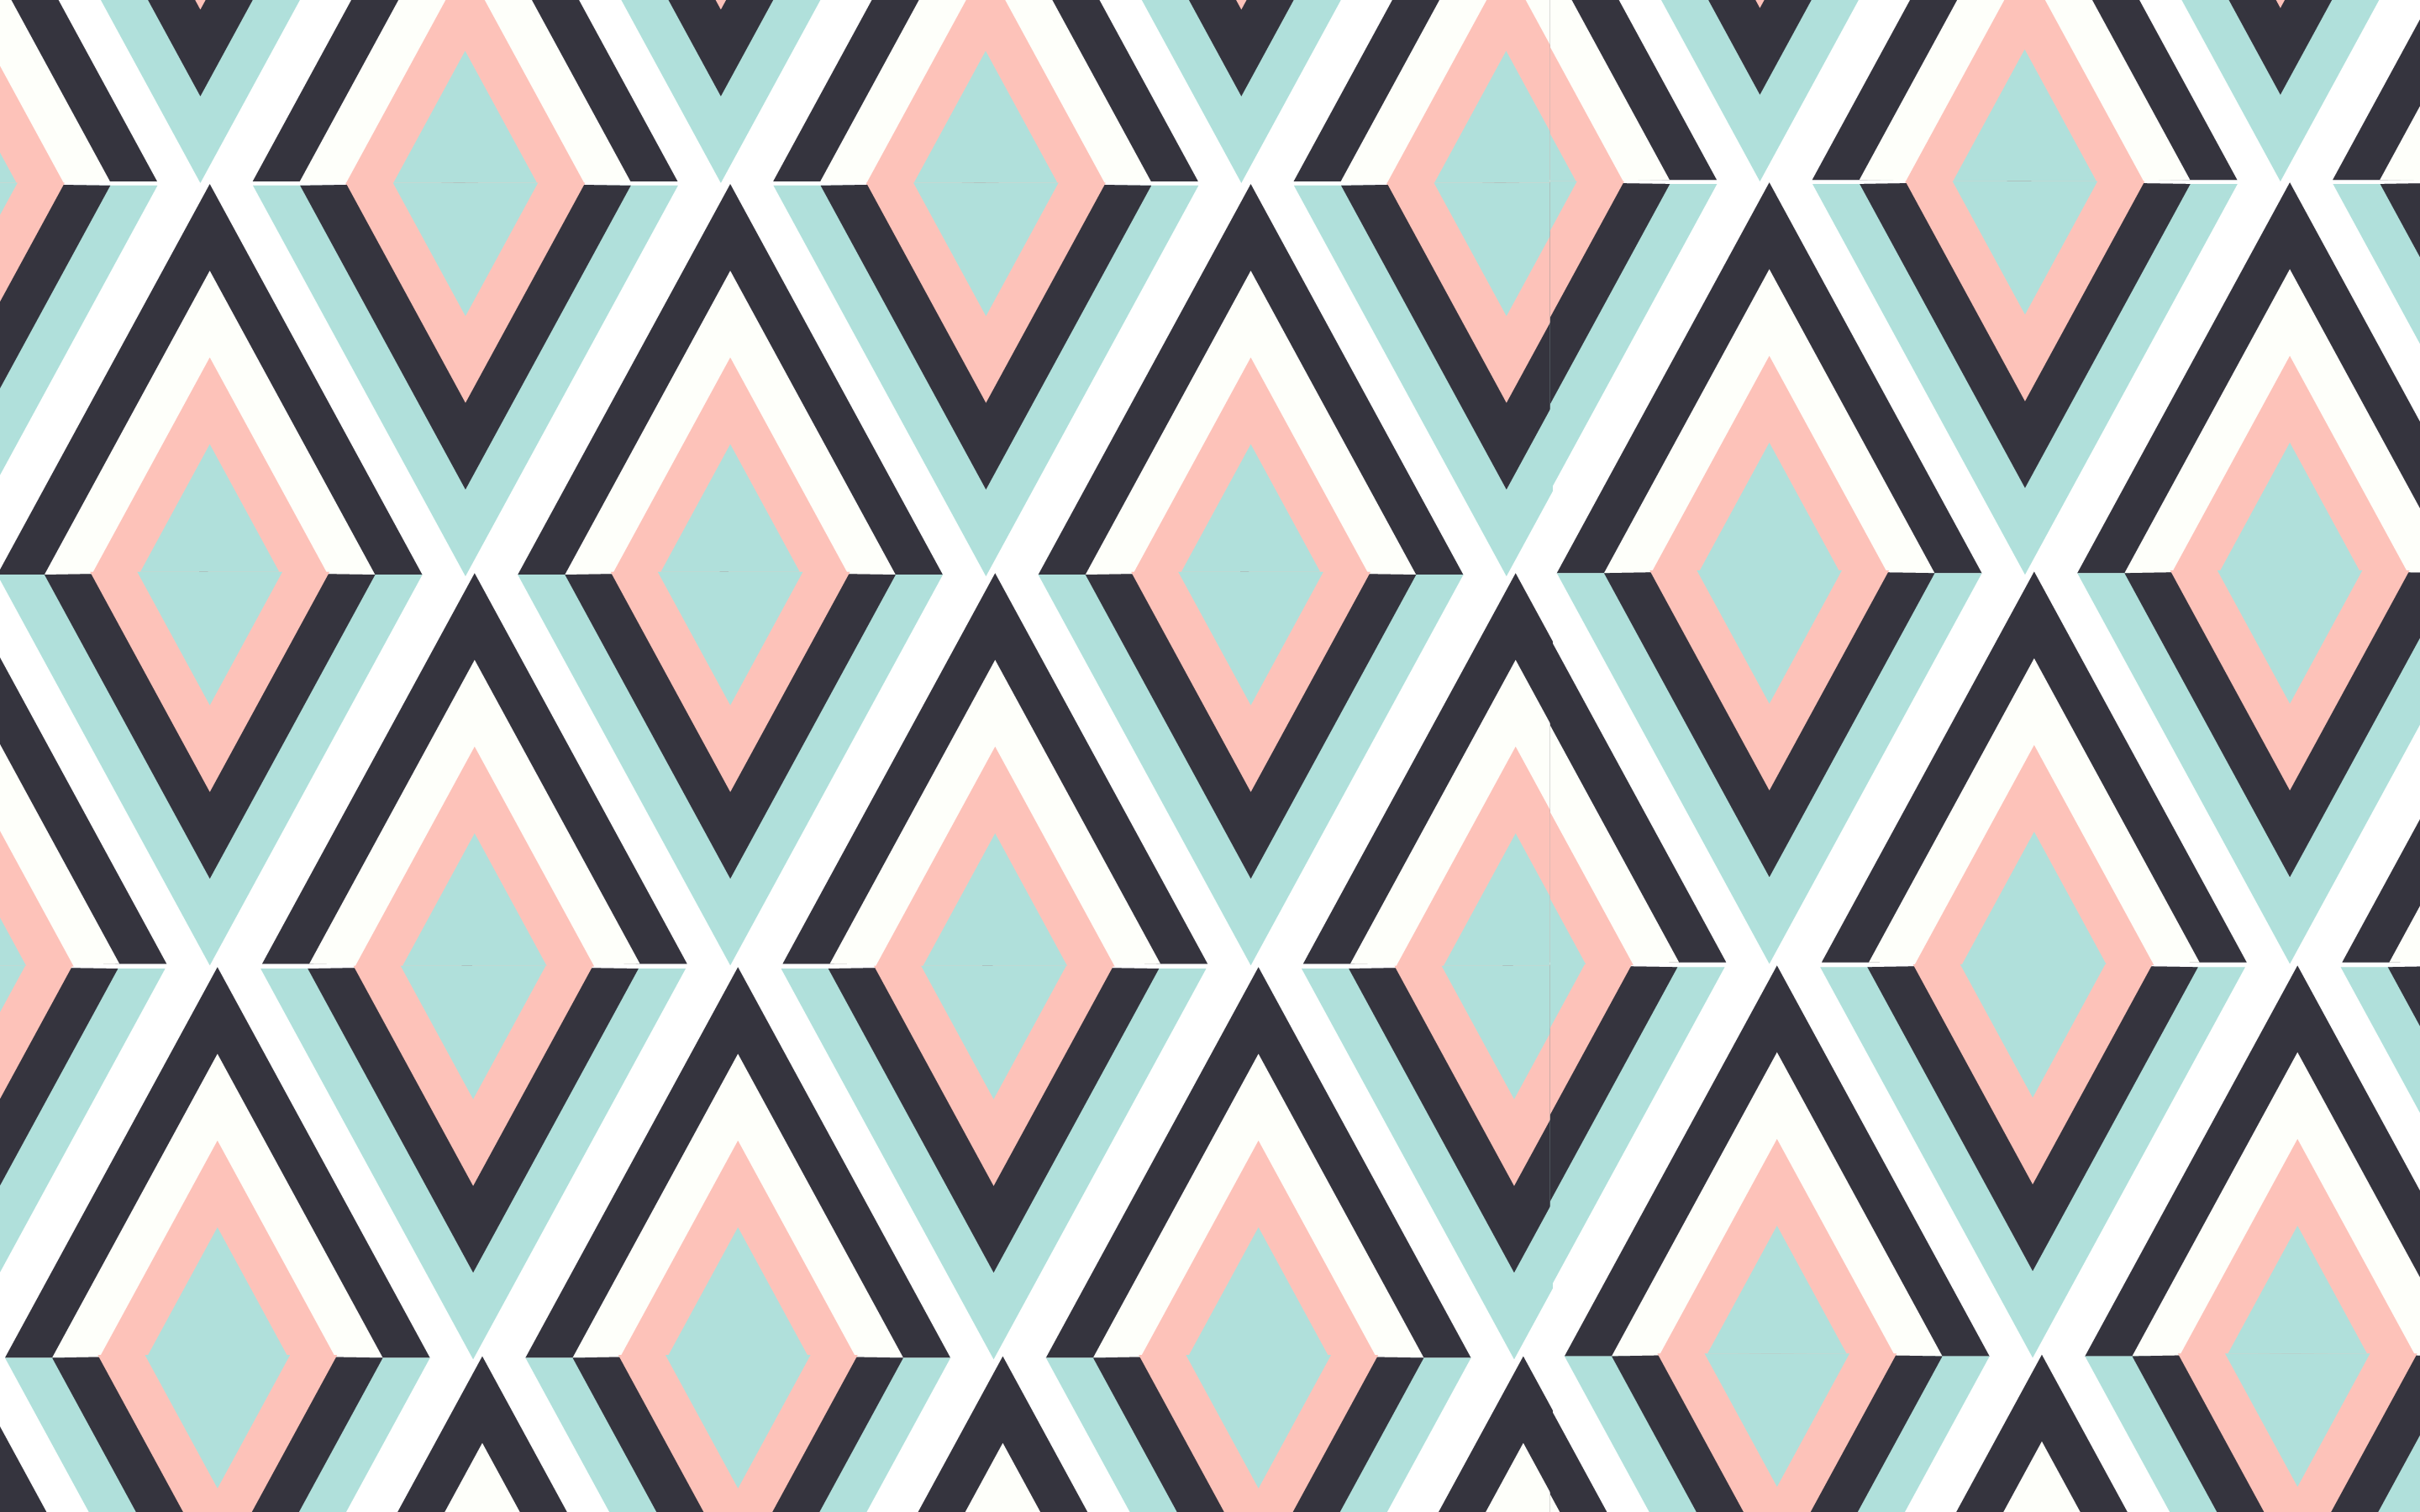  Geometric  Patterns Design For Customer Acquisition 